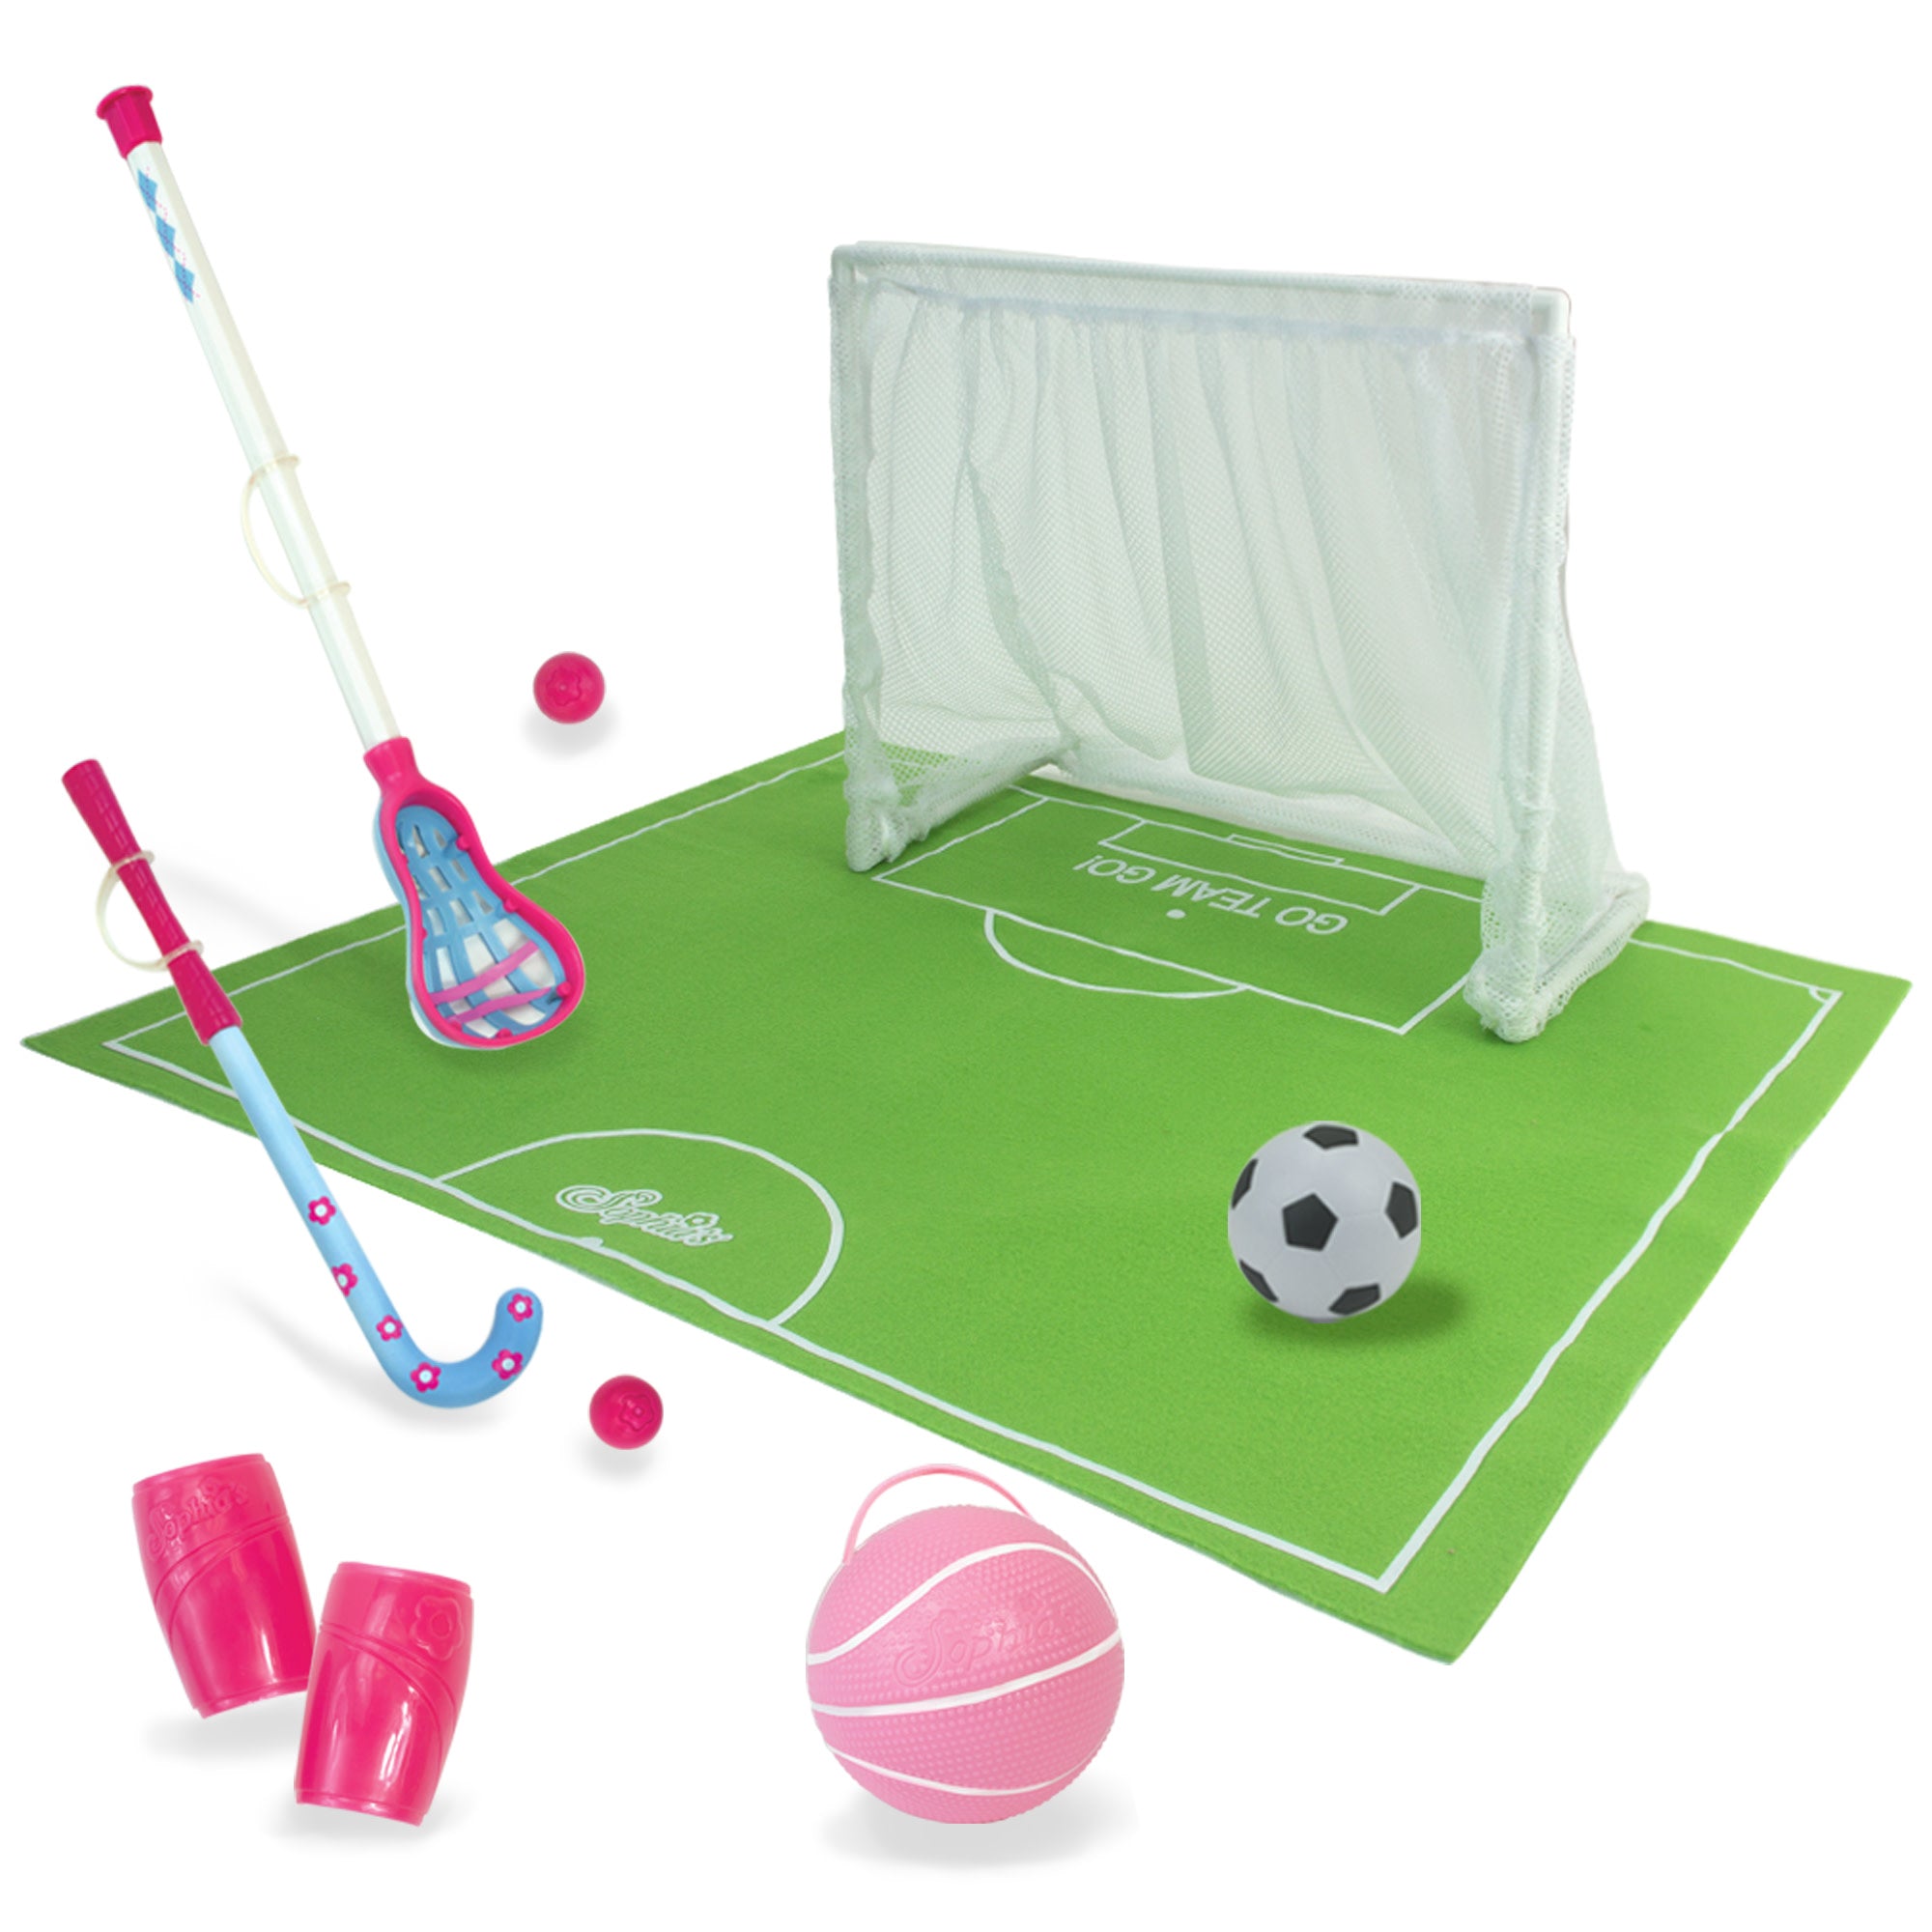 Sophia’s Complete Lacrosse, Field Hockey, Soccer, & Basketball Sports Equipment Playset for 18” Dolls, Pink/Green